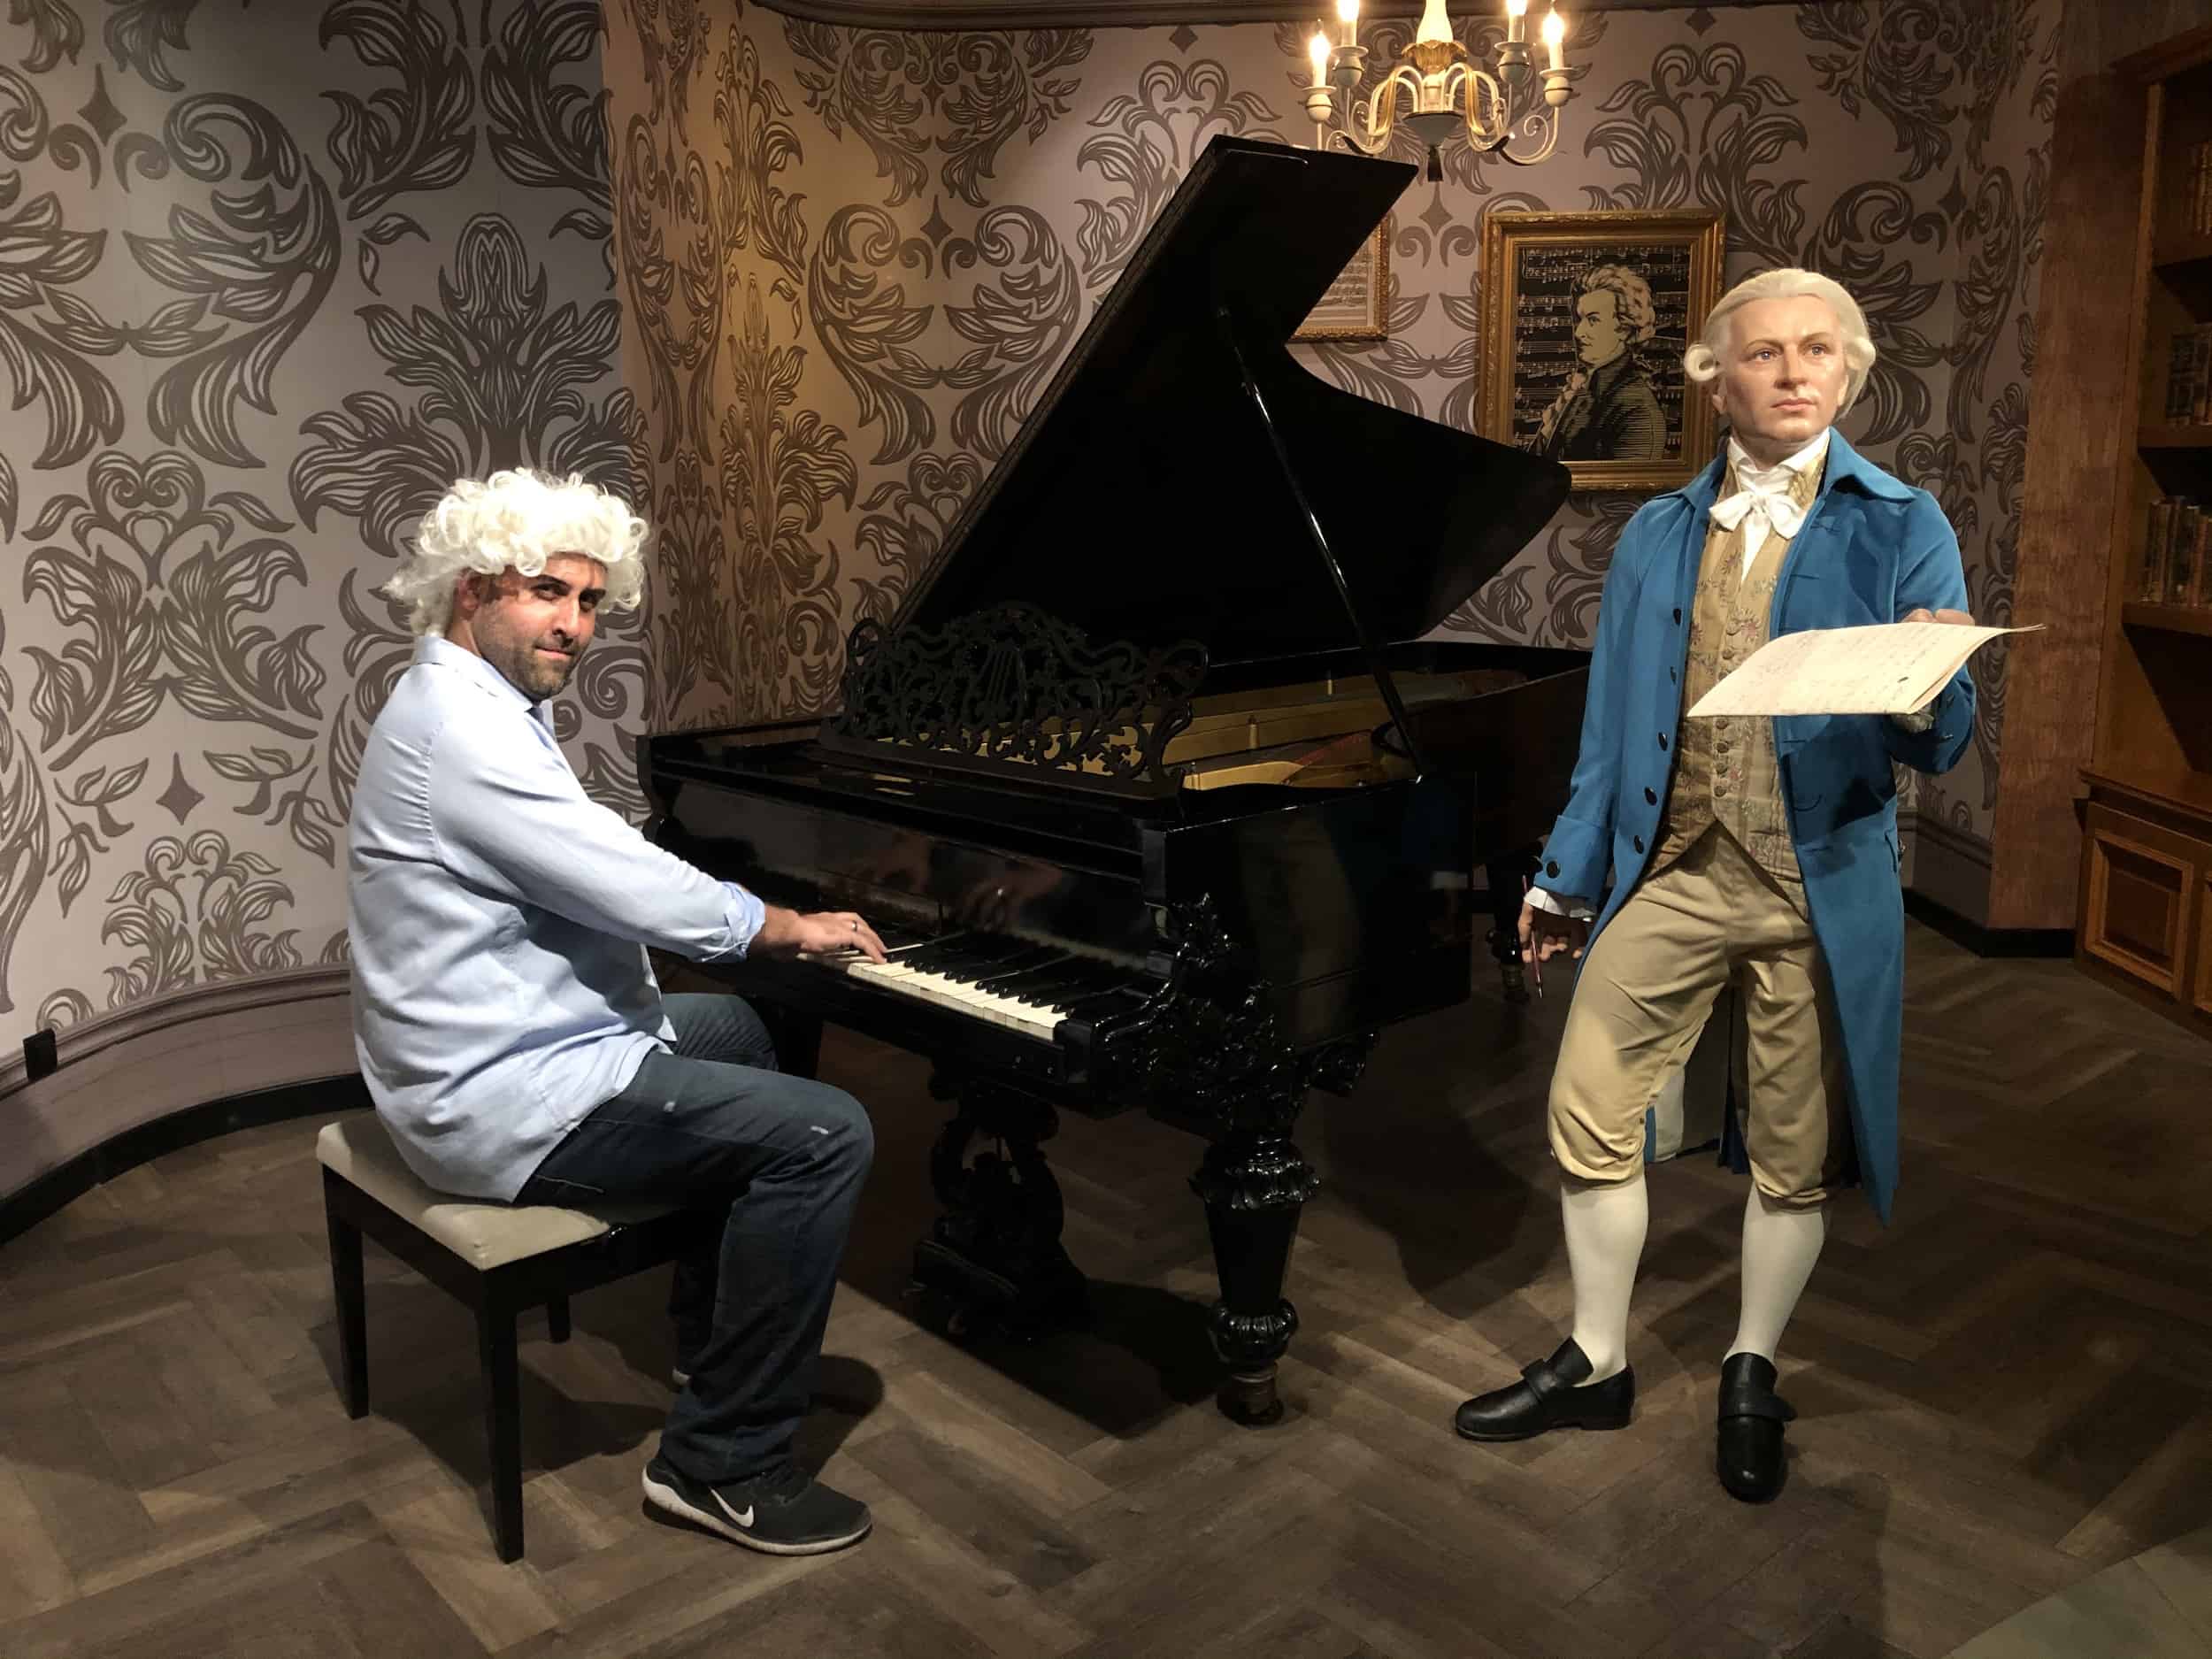 Jamming with Mozart